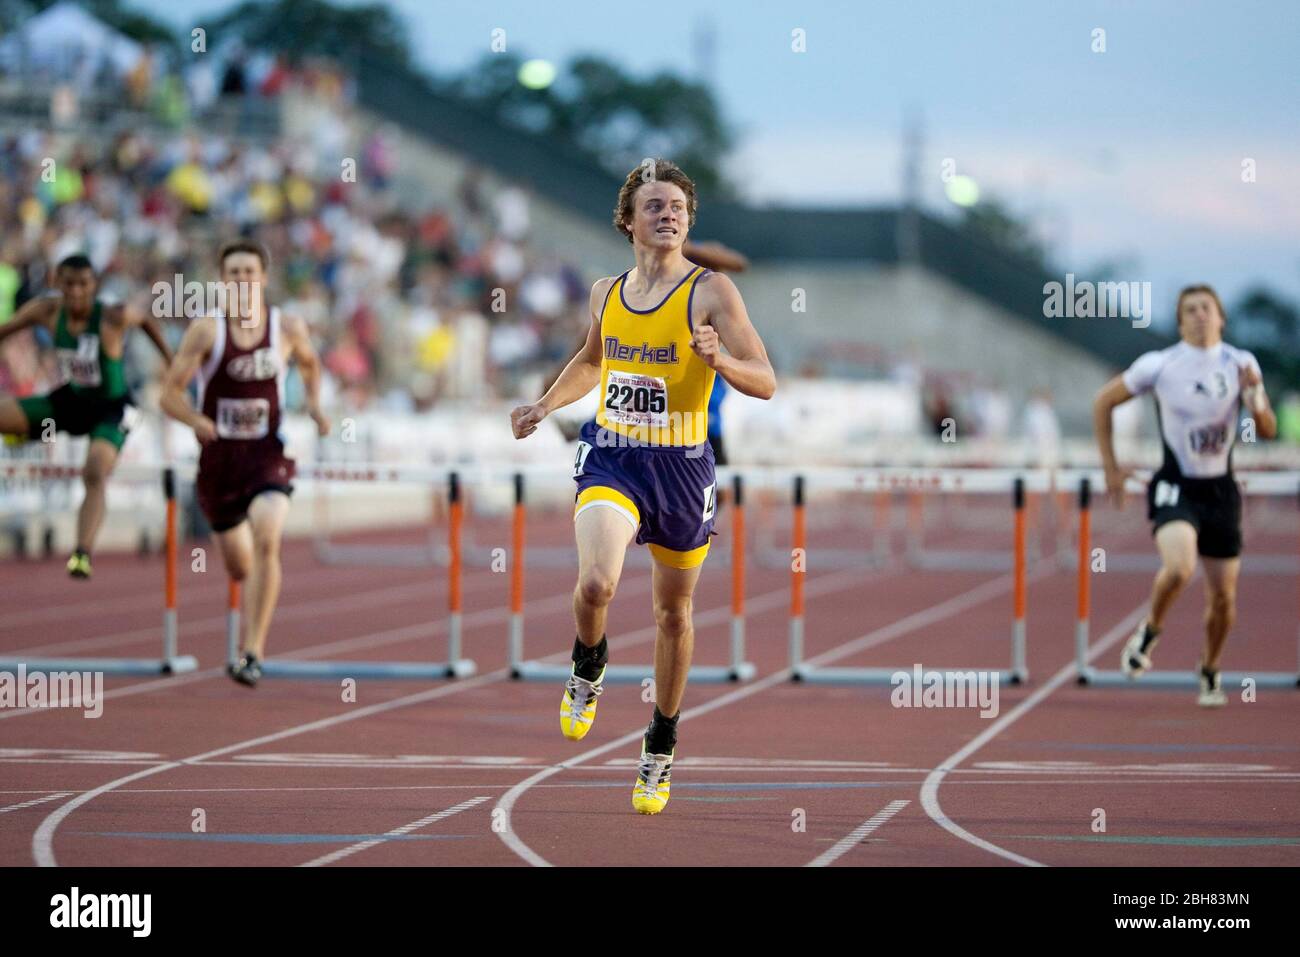 Austin Texas USA, June 5,2009: Kelly Barnhill from Merkel wins the boys 110-meter 2A hurdles at the annual Texas high school state championships track and field meet at the University of Texas track stadium. ©Bob Daemmrich Stock Photo